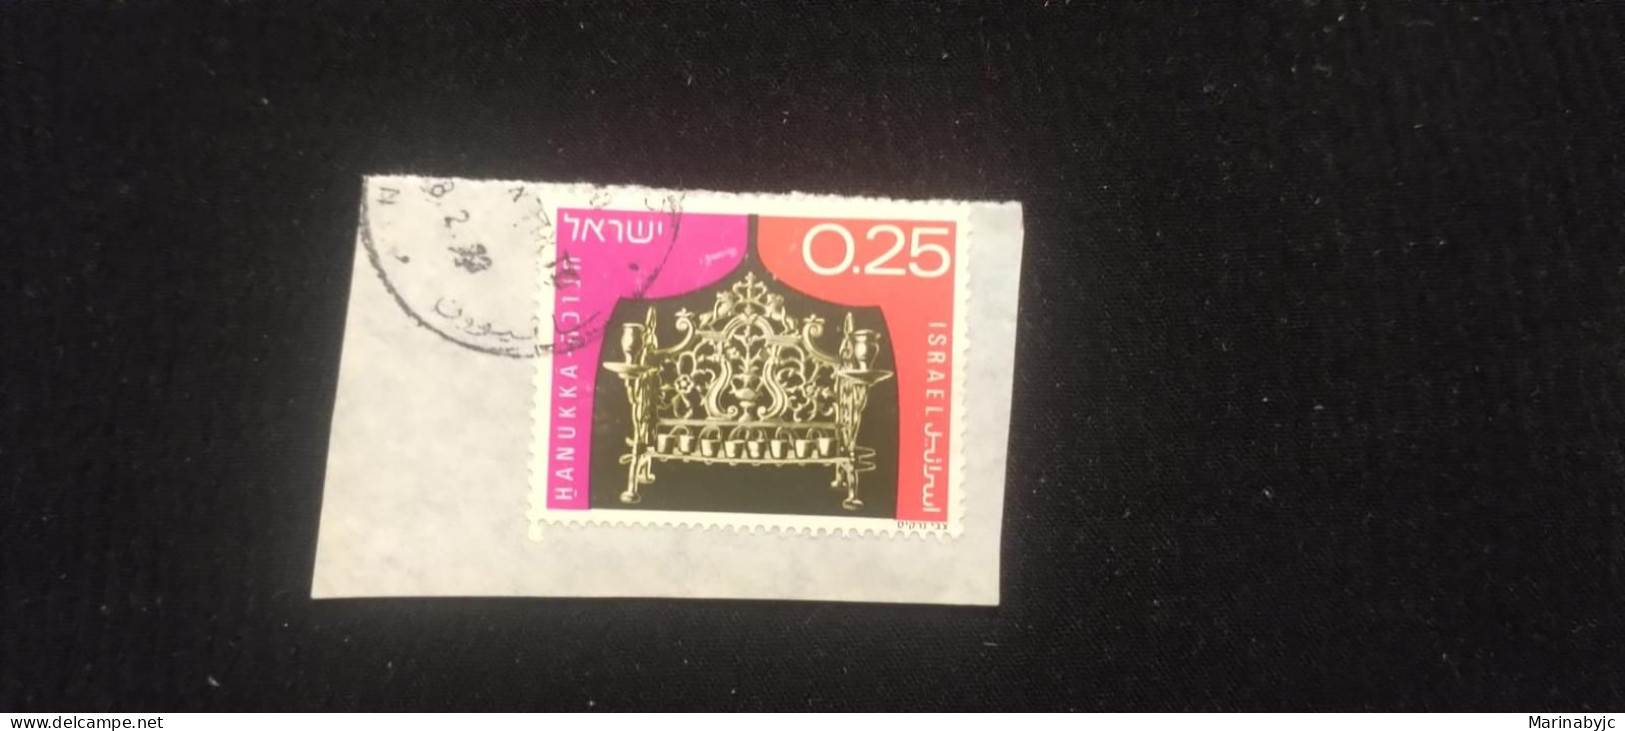 C) 569. 1972. ISRAEL. ENVELOPE SHEET WITH POLAND STAMP, 18TH CENTURY, BRASS. UC. USED. - Sonstige - Asien